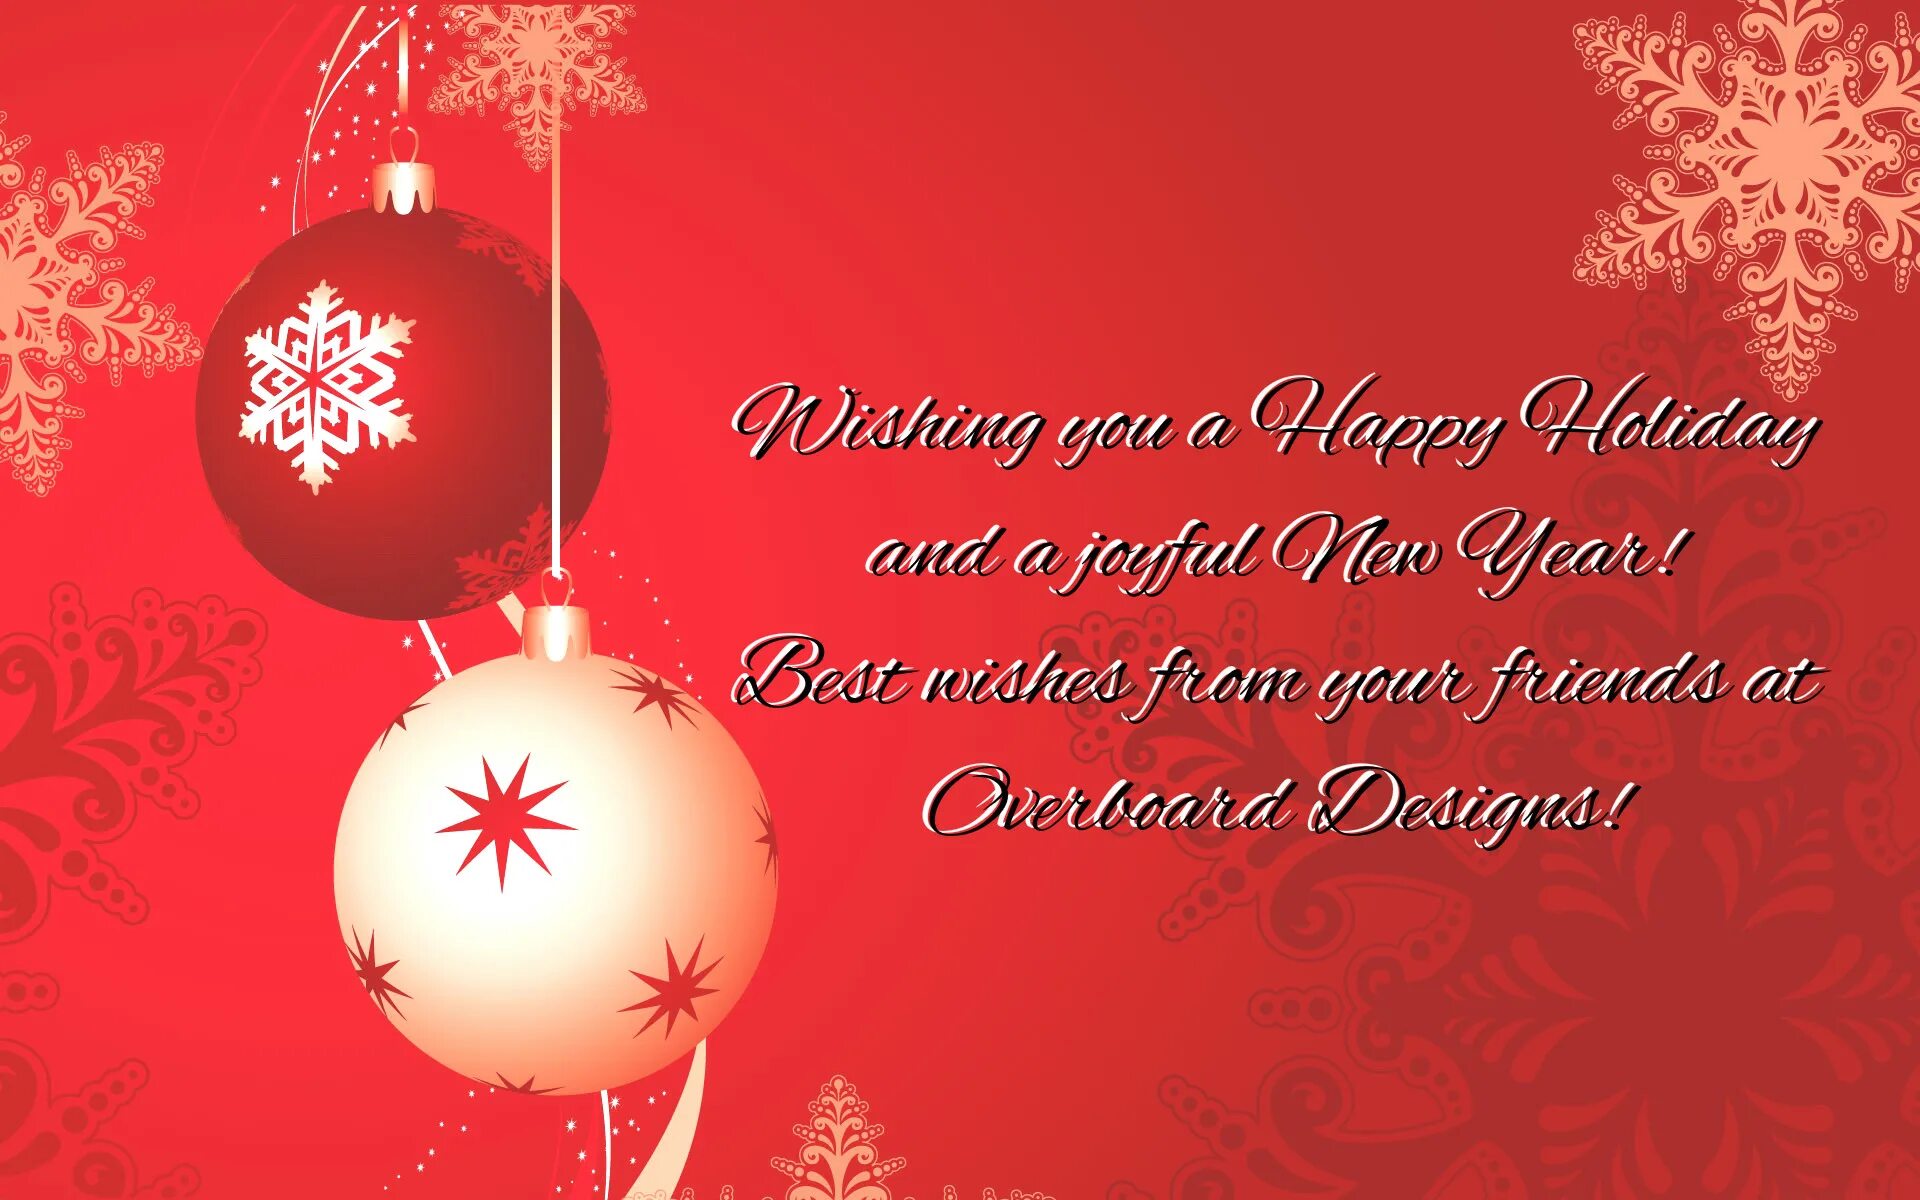 Christmas Wishes. Merry Christmas Wishes. Christmas Greetings. Wishes for Christmas and New year. Christmas greeting